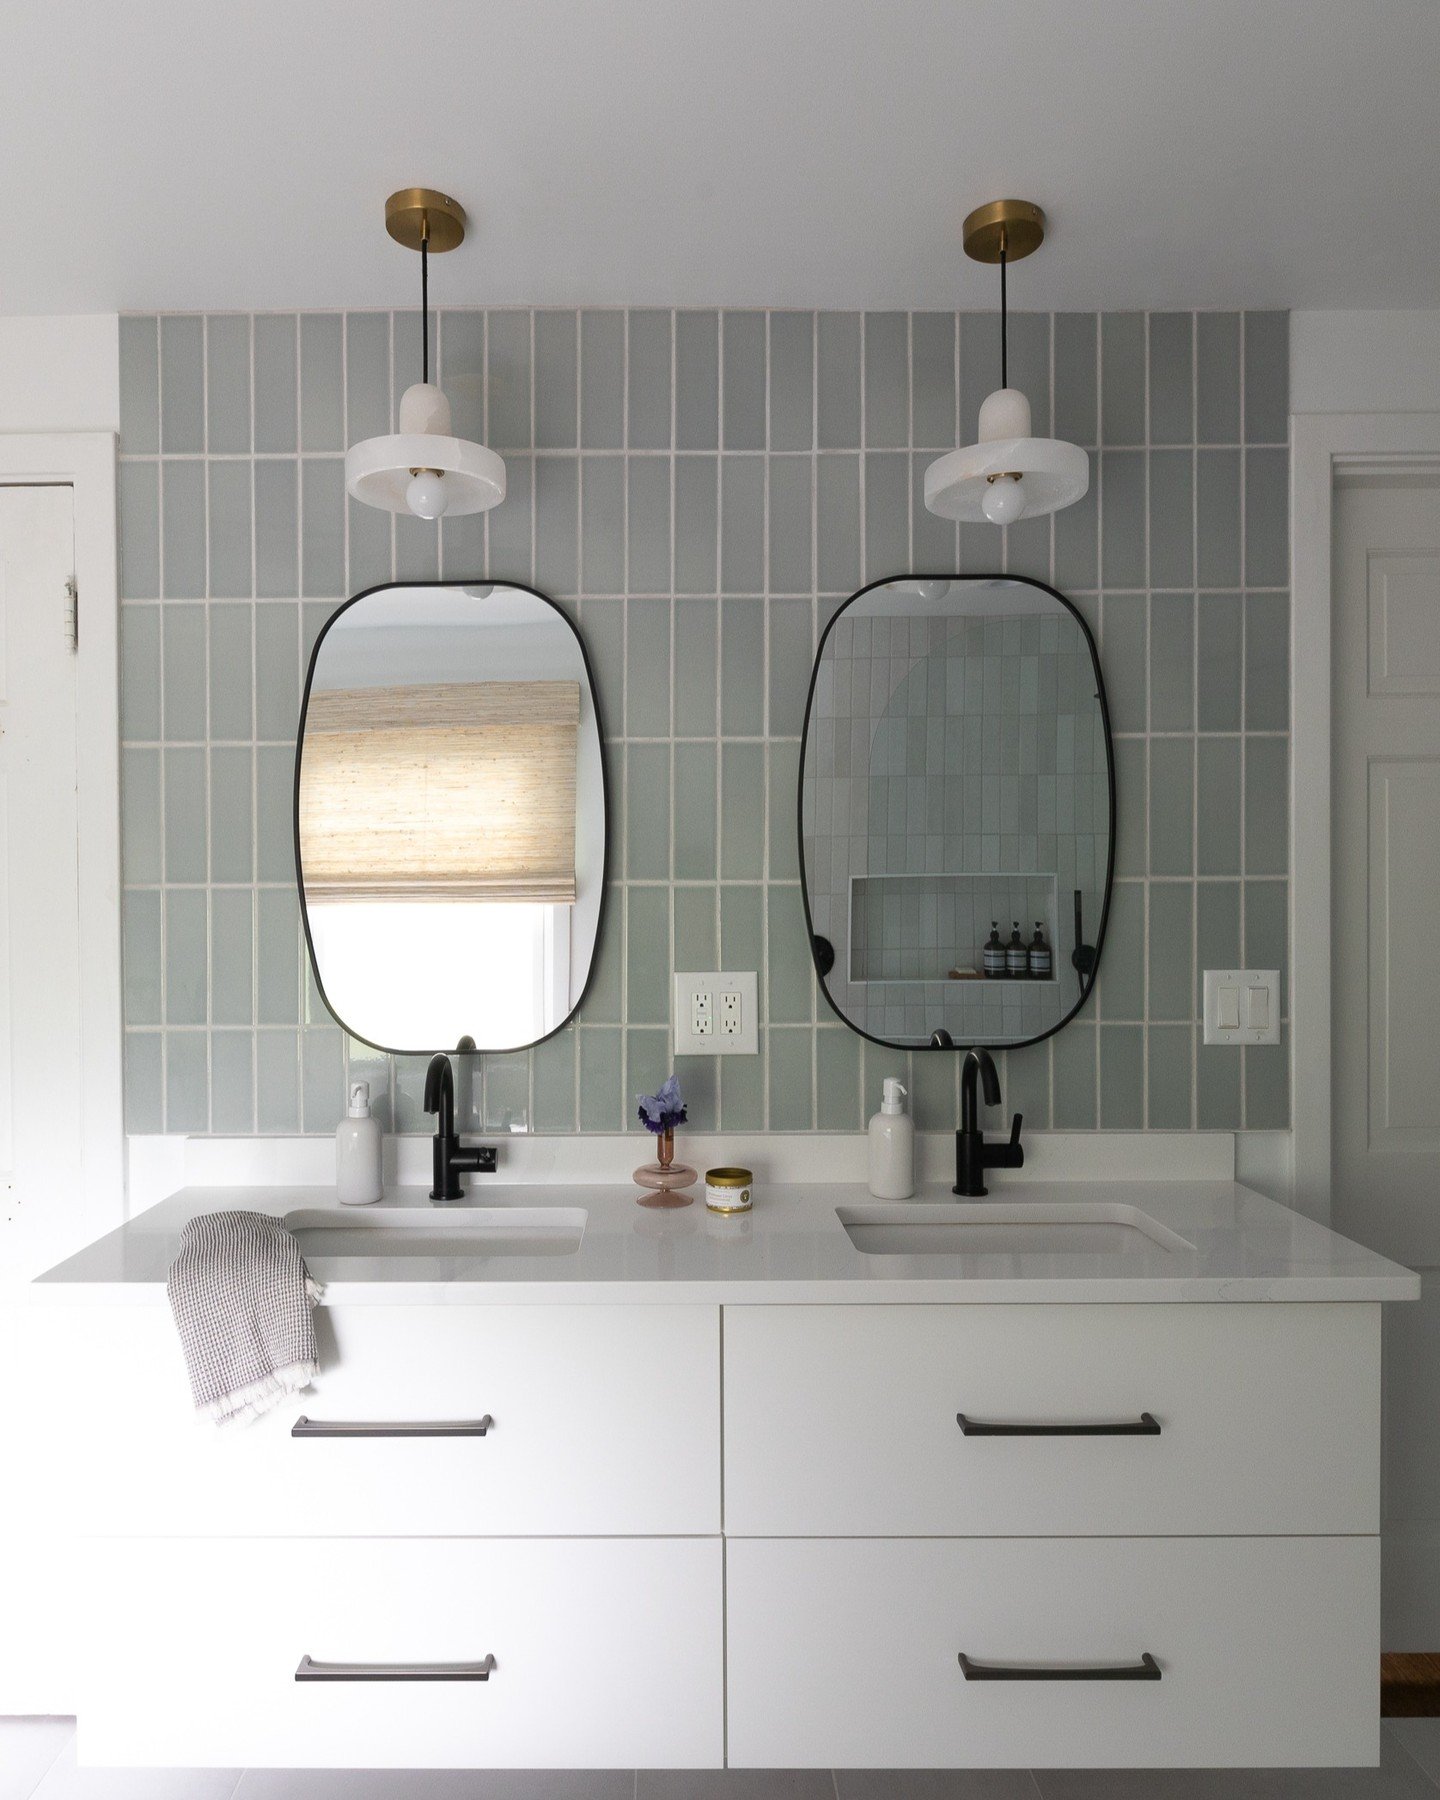 Here is our bright &amp; airy ensuite project! Previously closed off from the bedroom, this bathroom was expanded by opening up the unnecessarily large closet to maximize the layout and almost doubled the square footage of the bathroom. This allowed 